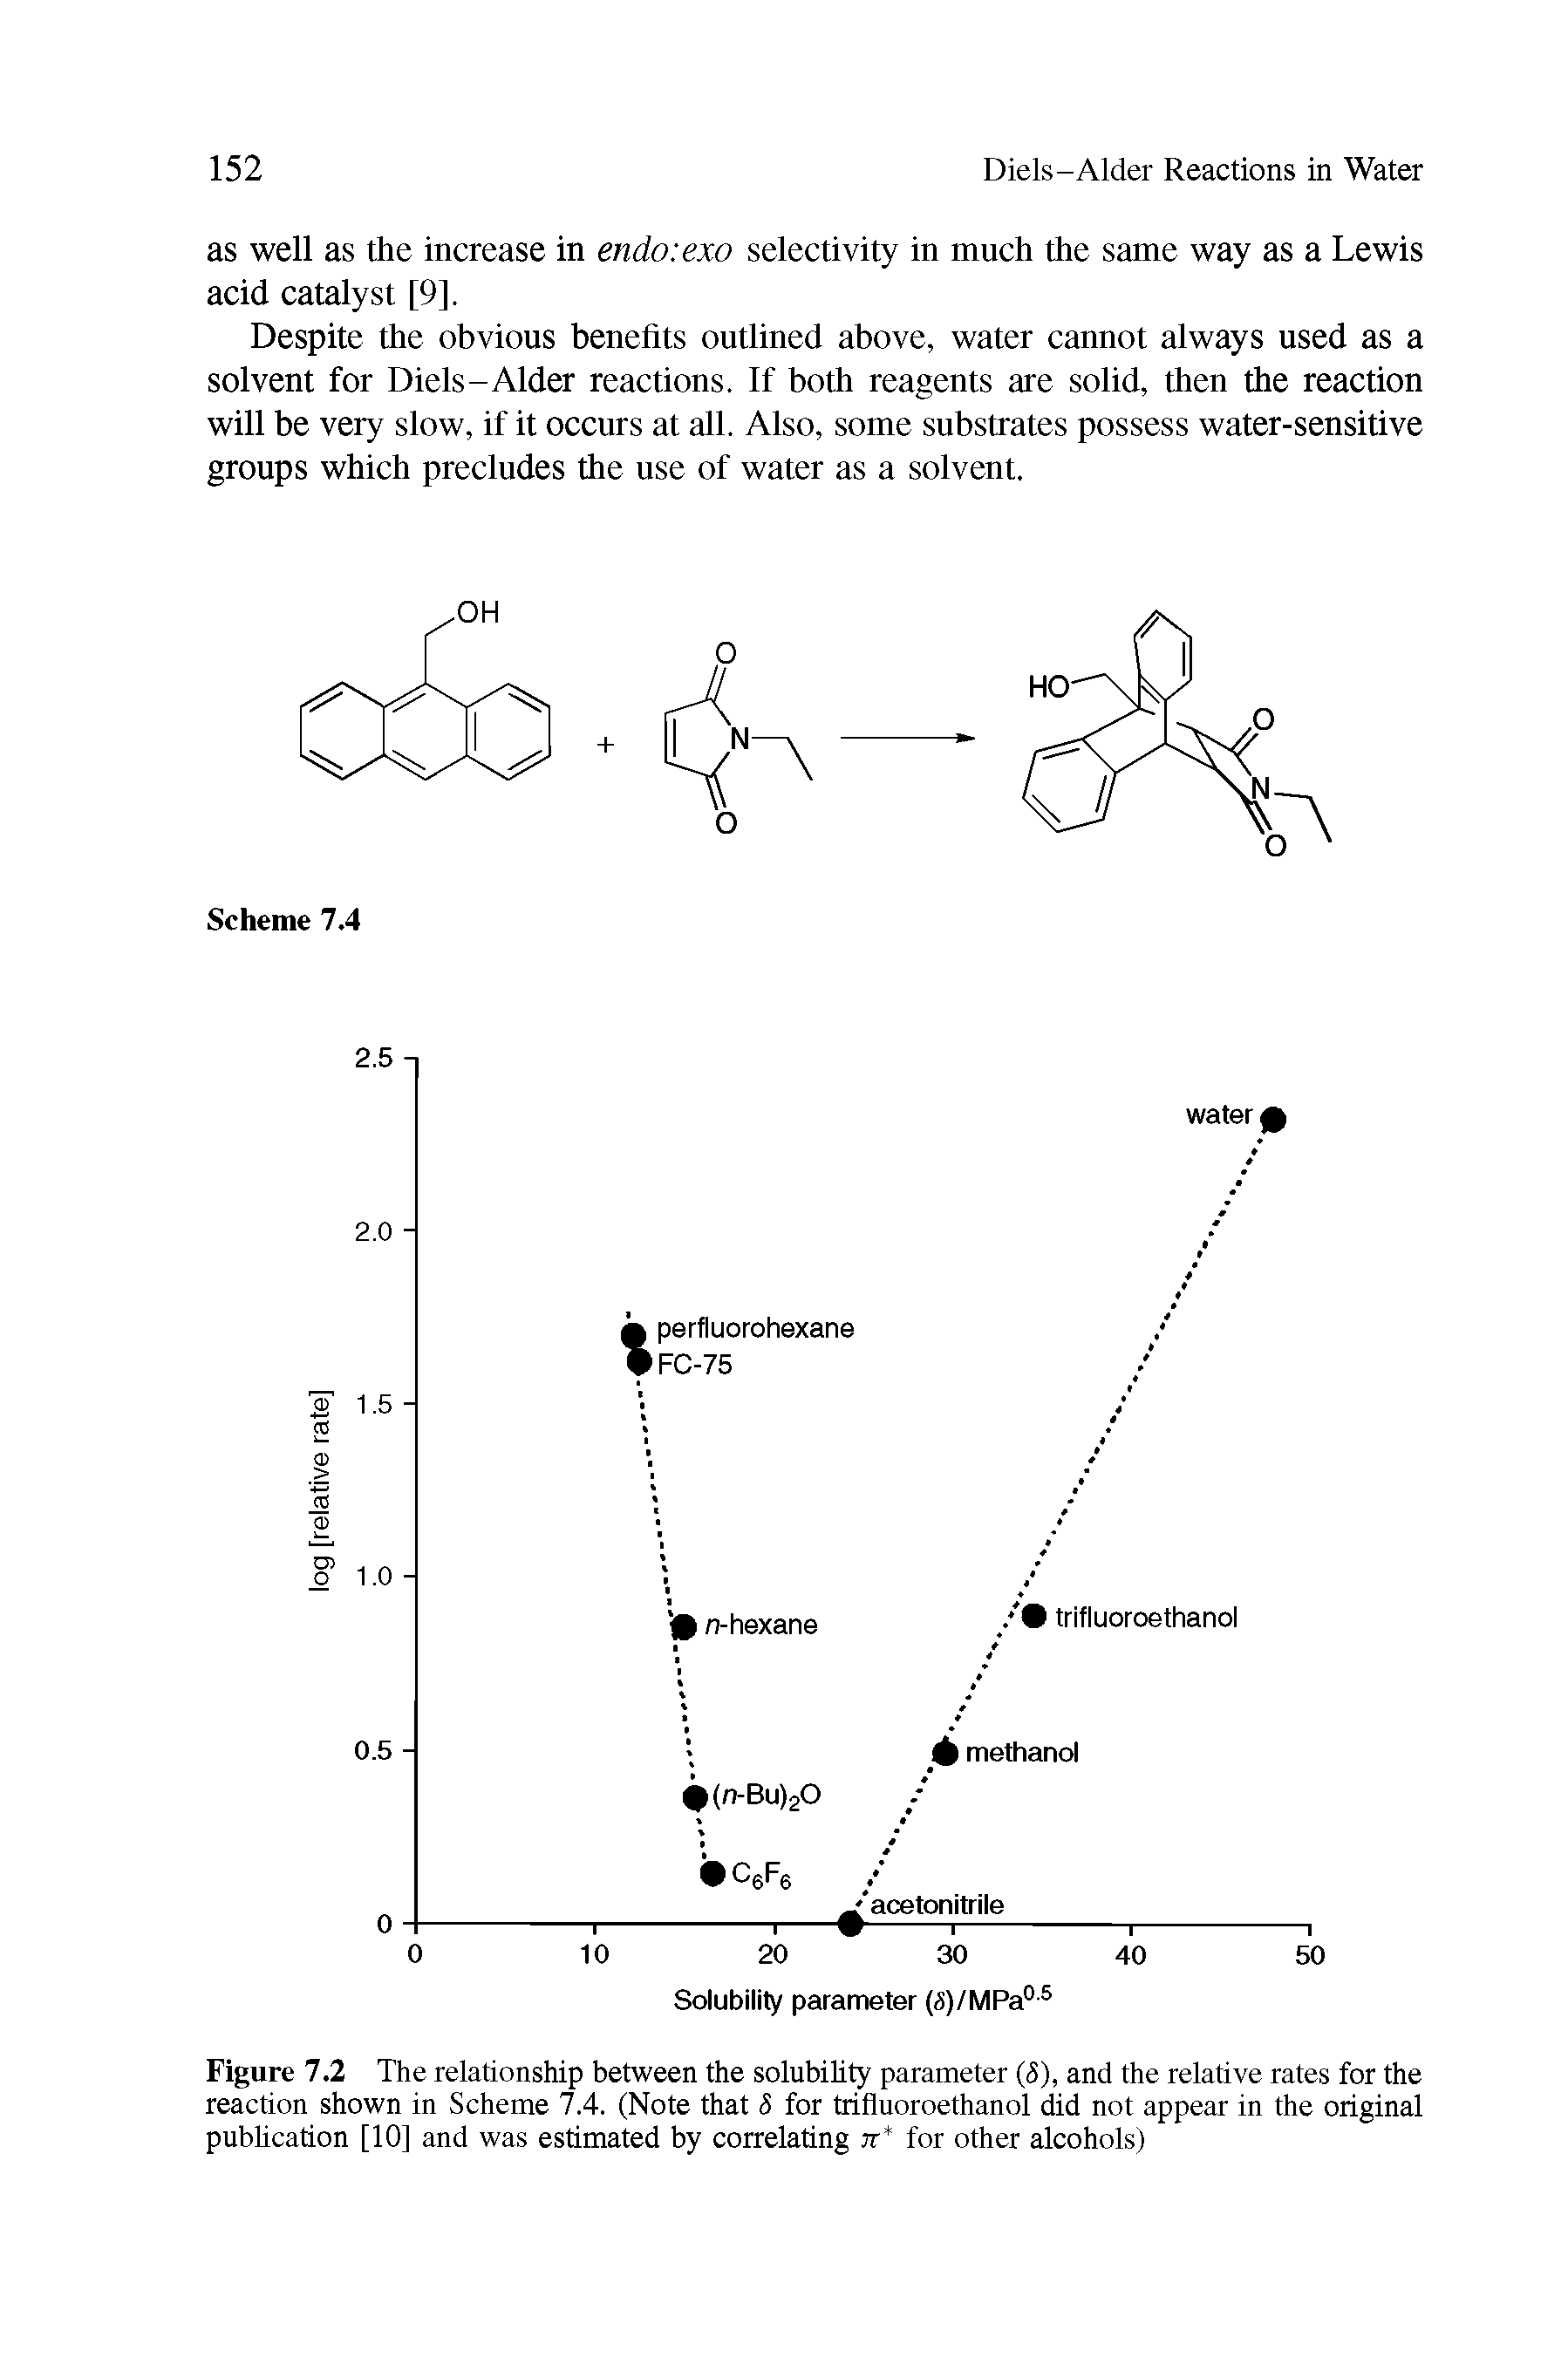 Figure 7.2 The relationship between the solubility parameter (8), and the relative rates for the reaction shown in Scheme 7.4. (Note that 8 for trifluoroethanol did not appear in the original publication [10] and was estimated by correlating it for other alcohols)...